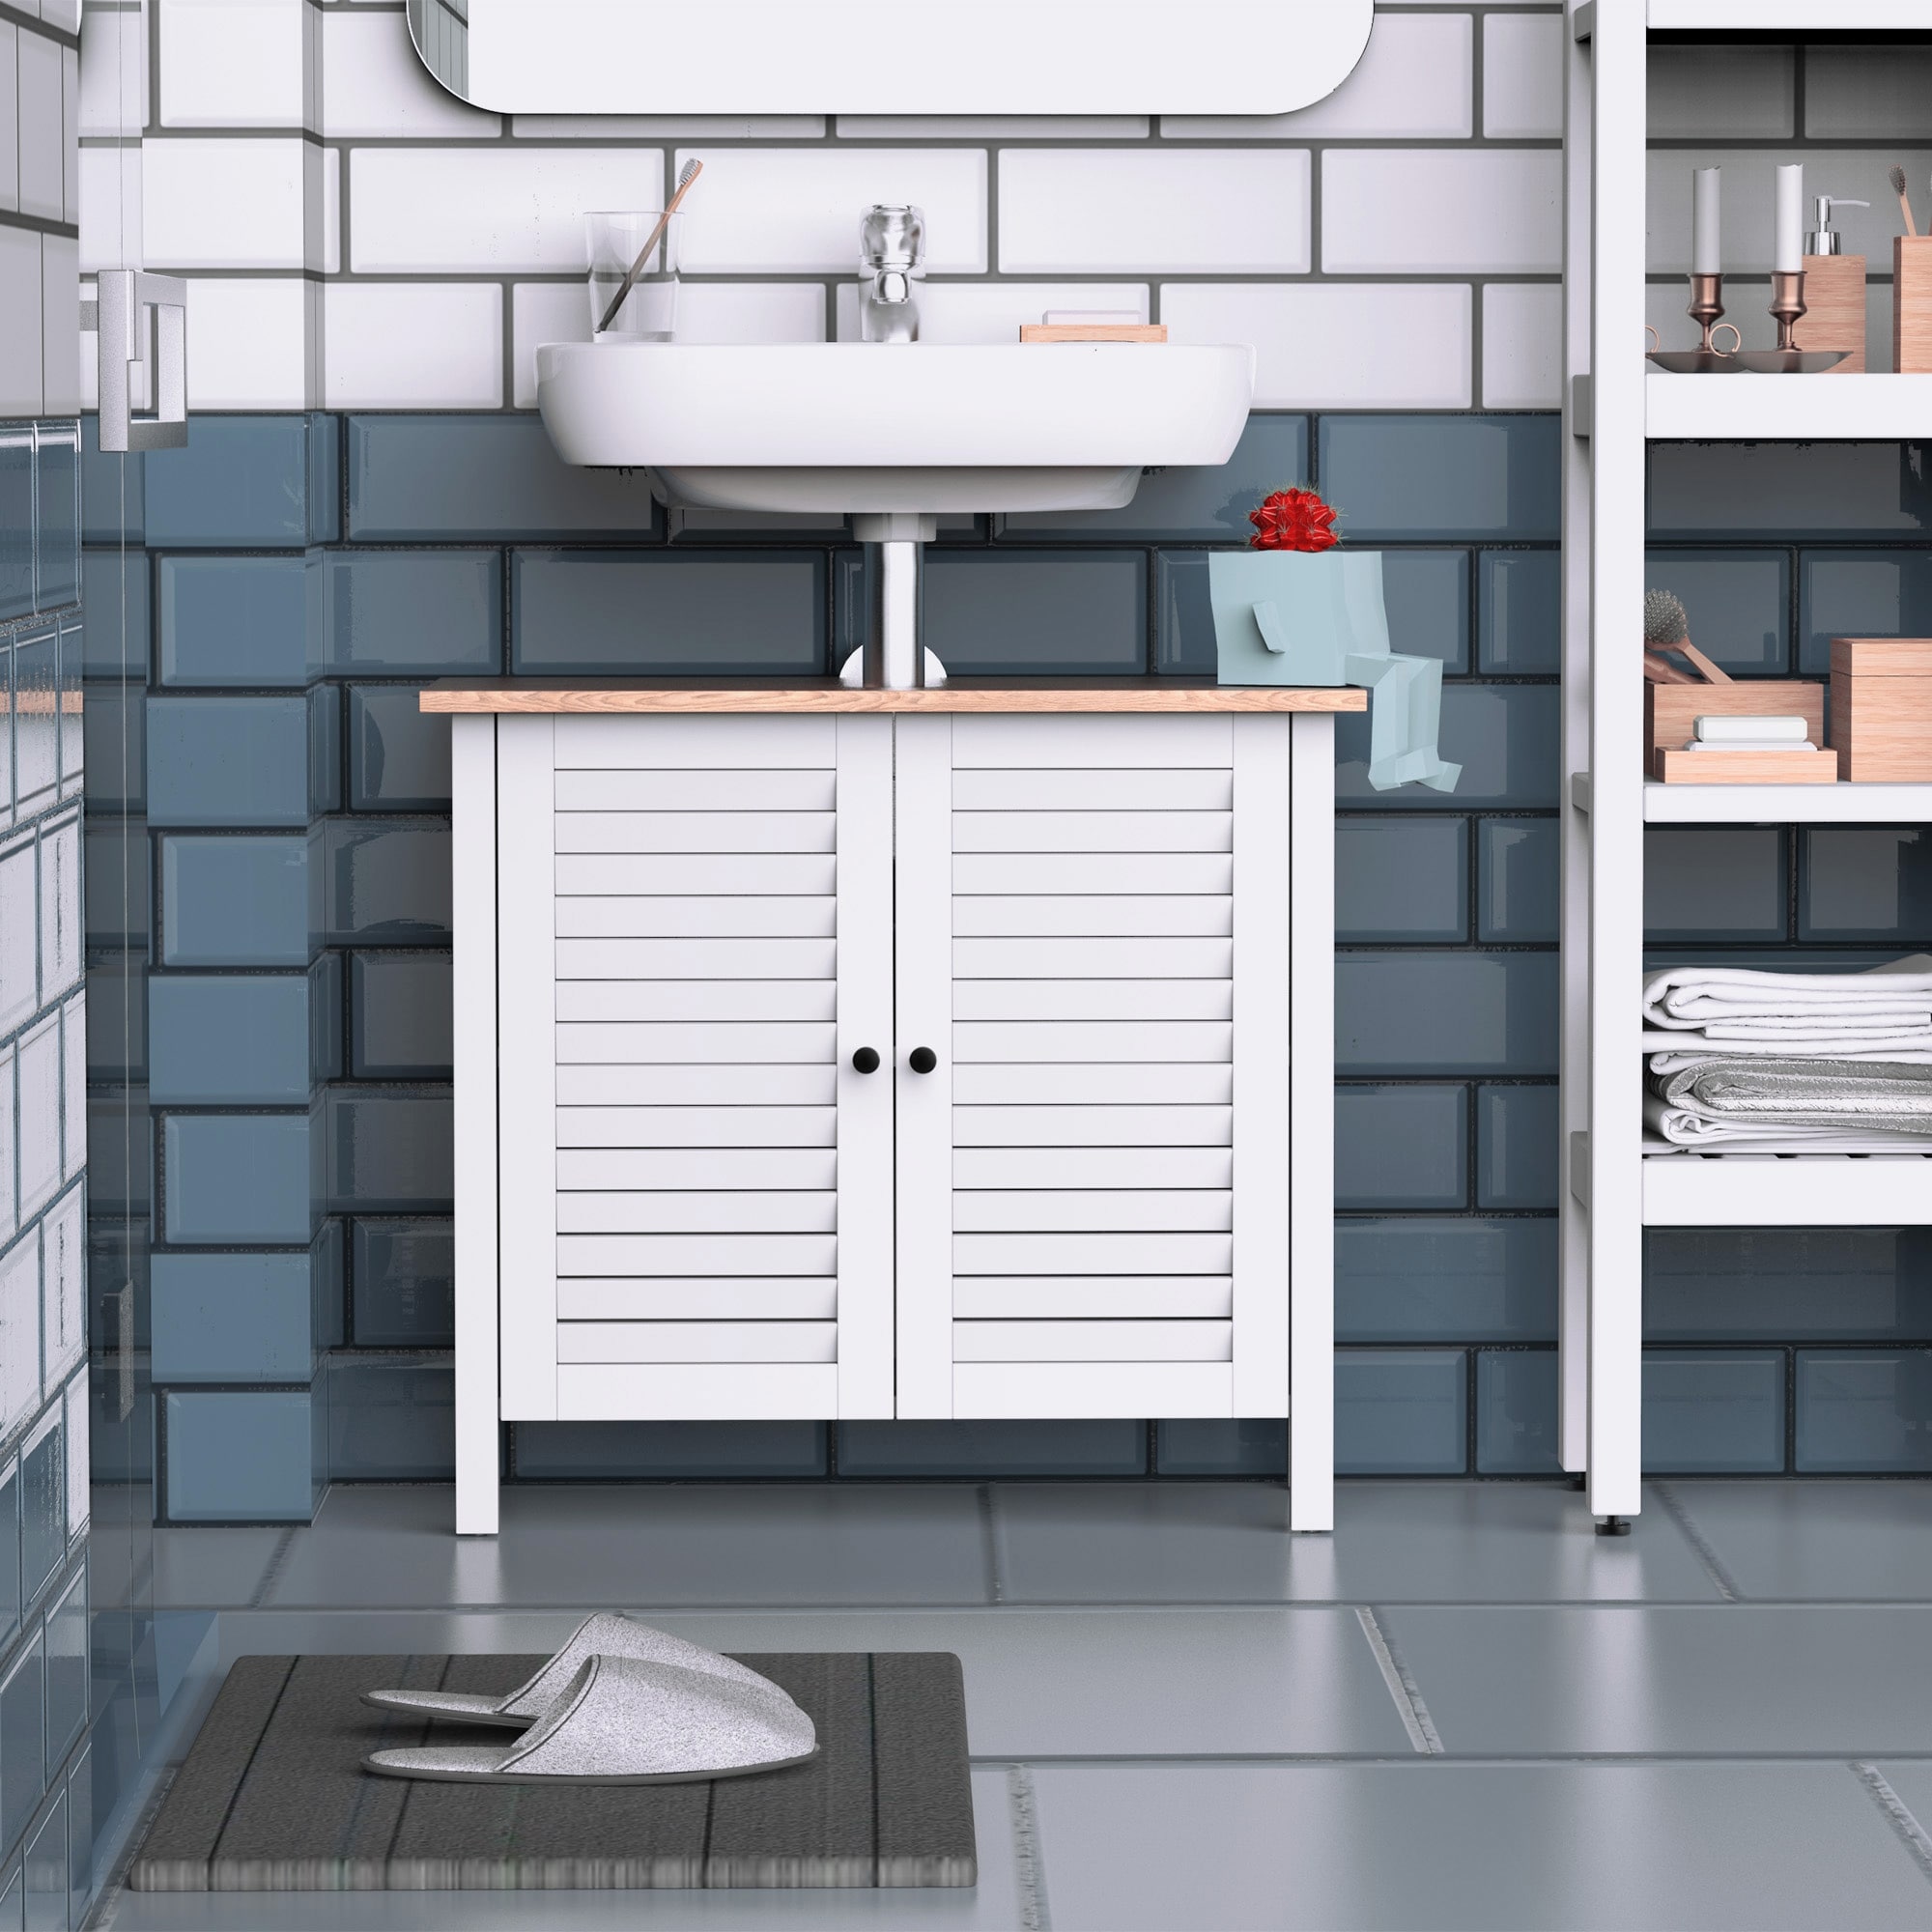 https://ak1.ostkcdn.com/images/products/is/images/direct/36e3a5d4d138752b4bea4cb8d317a667dac89898/HOMCOM-Under-Sink-Storage-Cabinet-with-Double-Layers-Bathroom-Cabinet-Space-Saver-Organizer-2-Door-Floor-Cabinet%2C-White.jpg